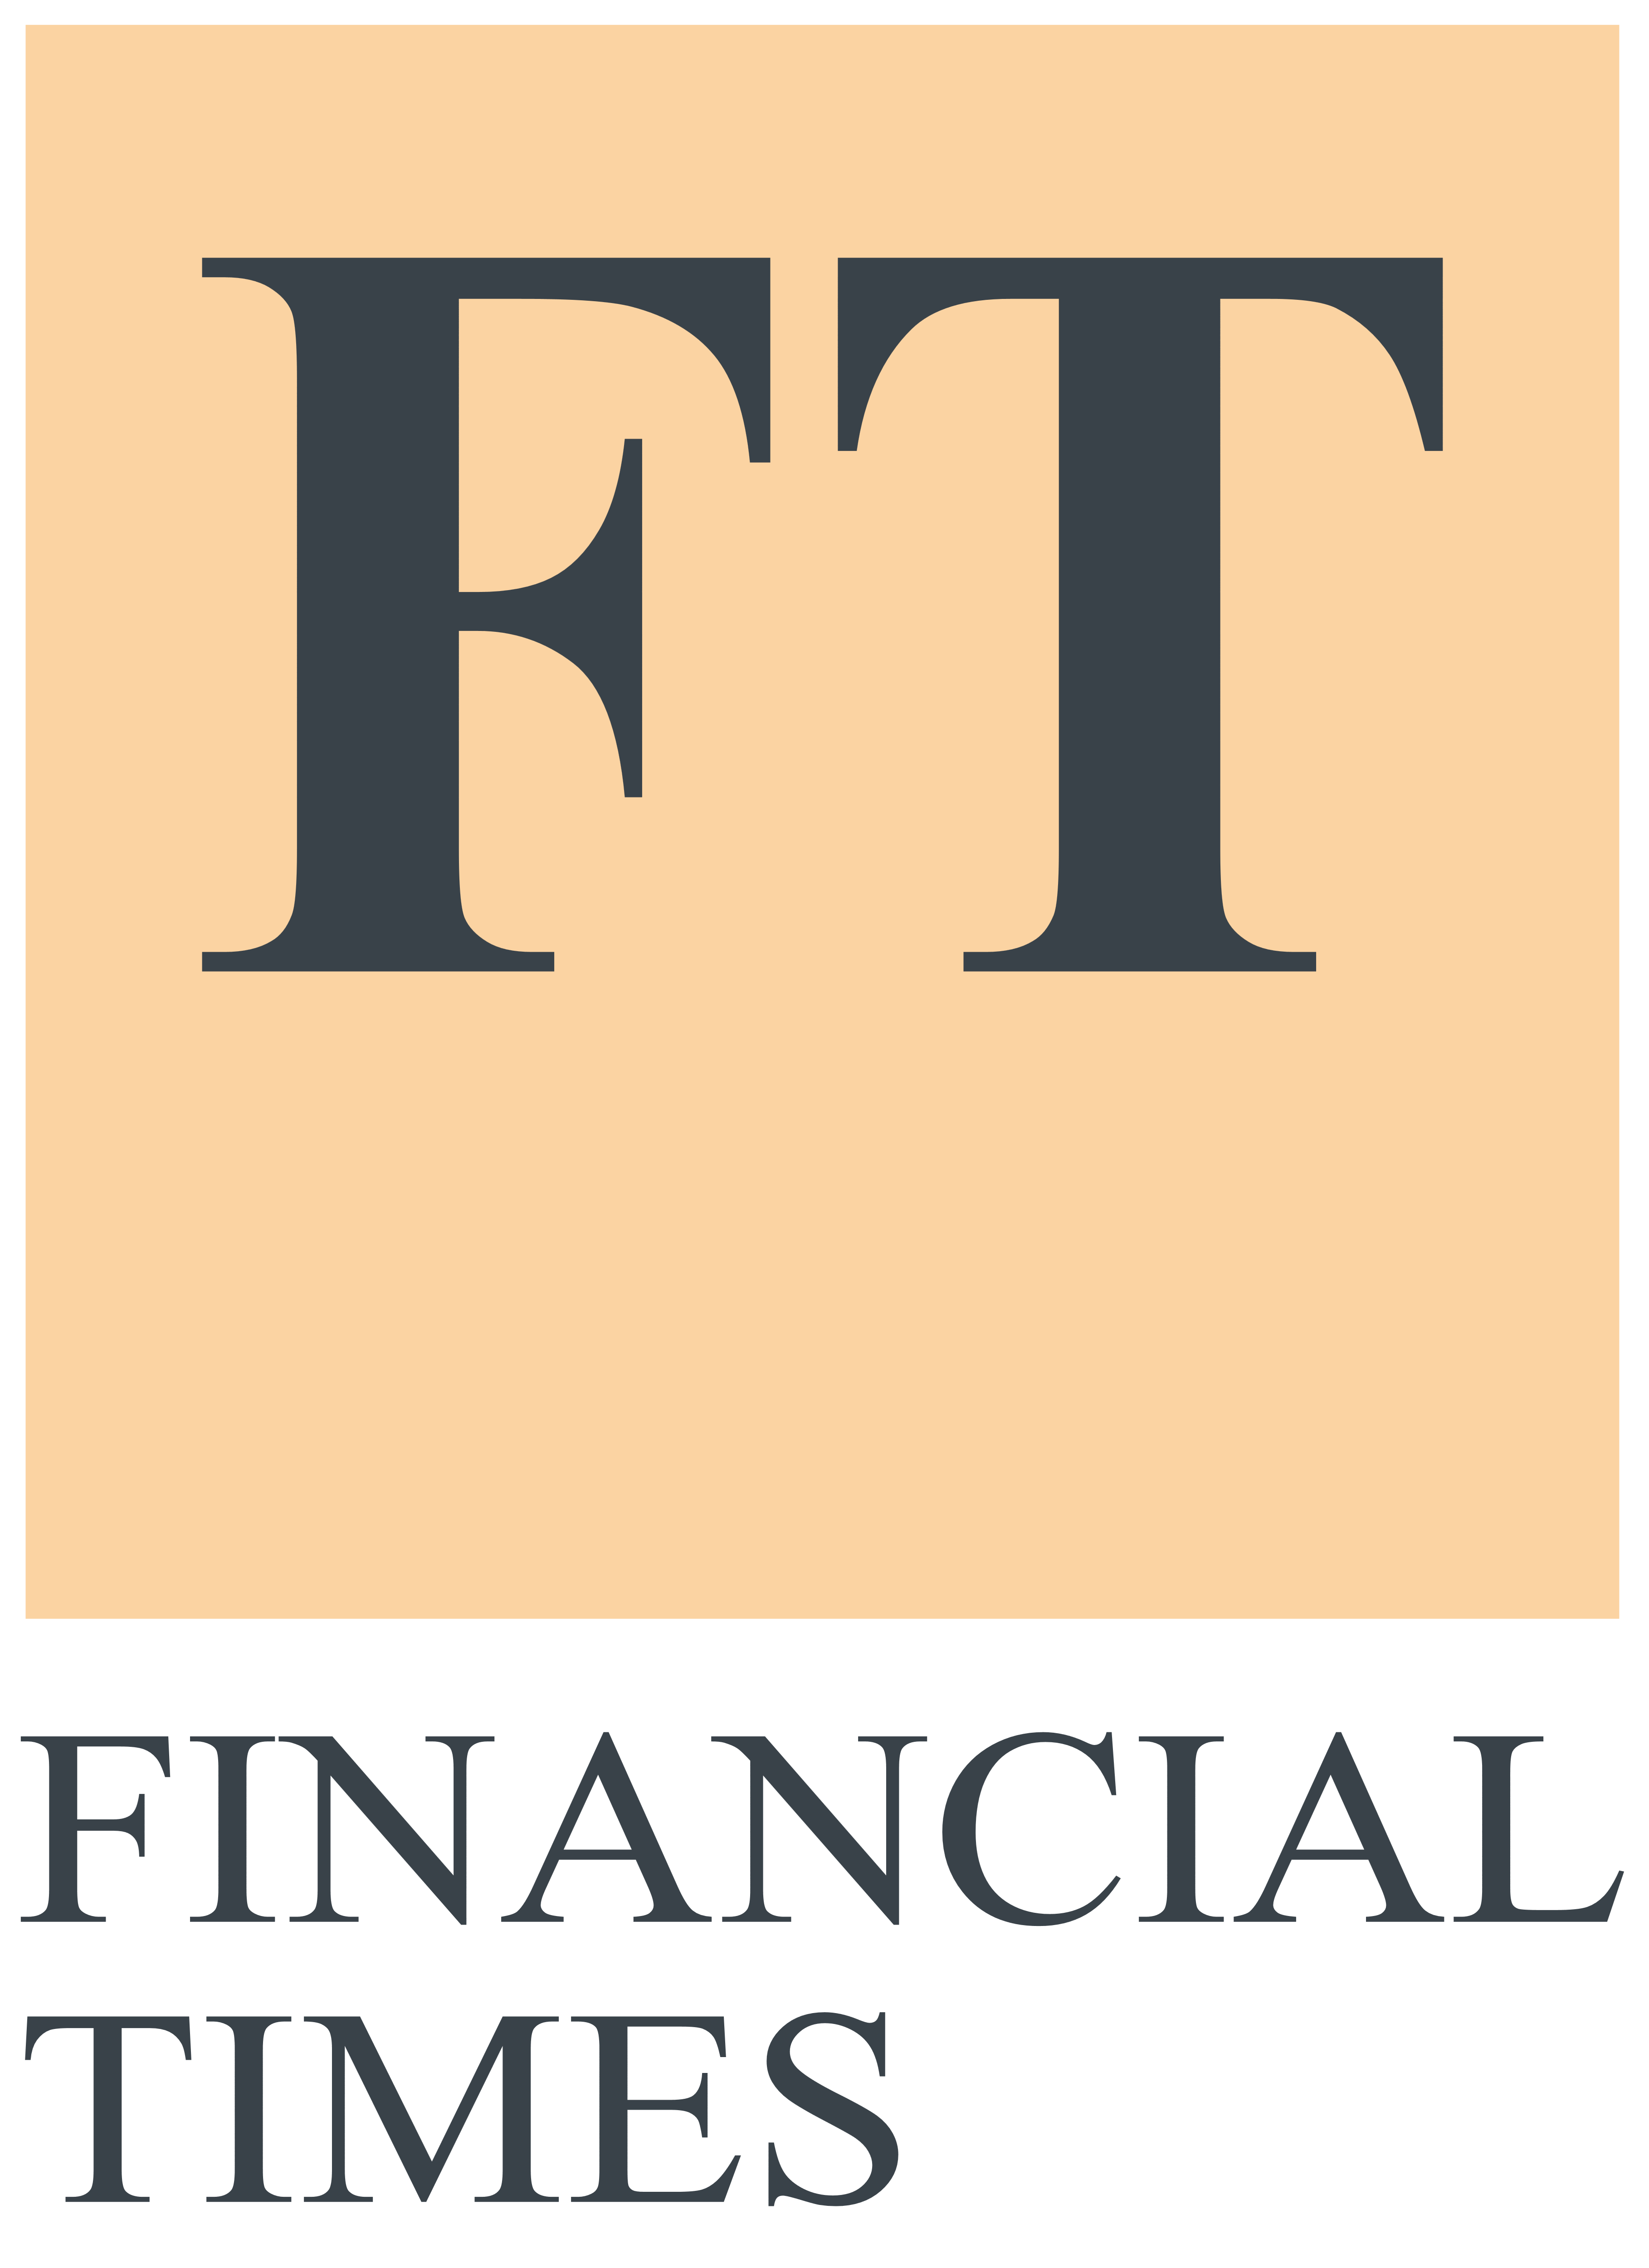 FT, The Financial Times.